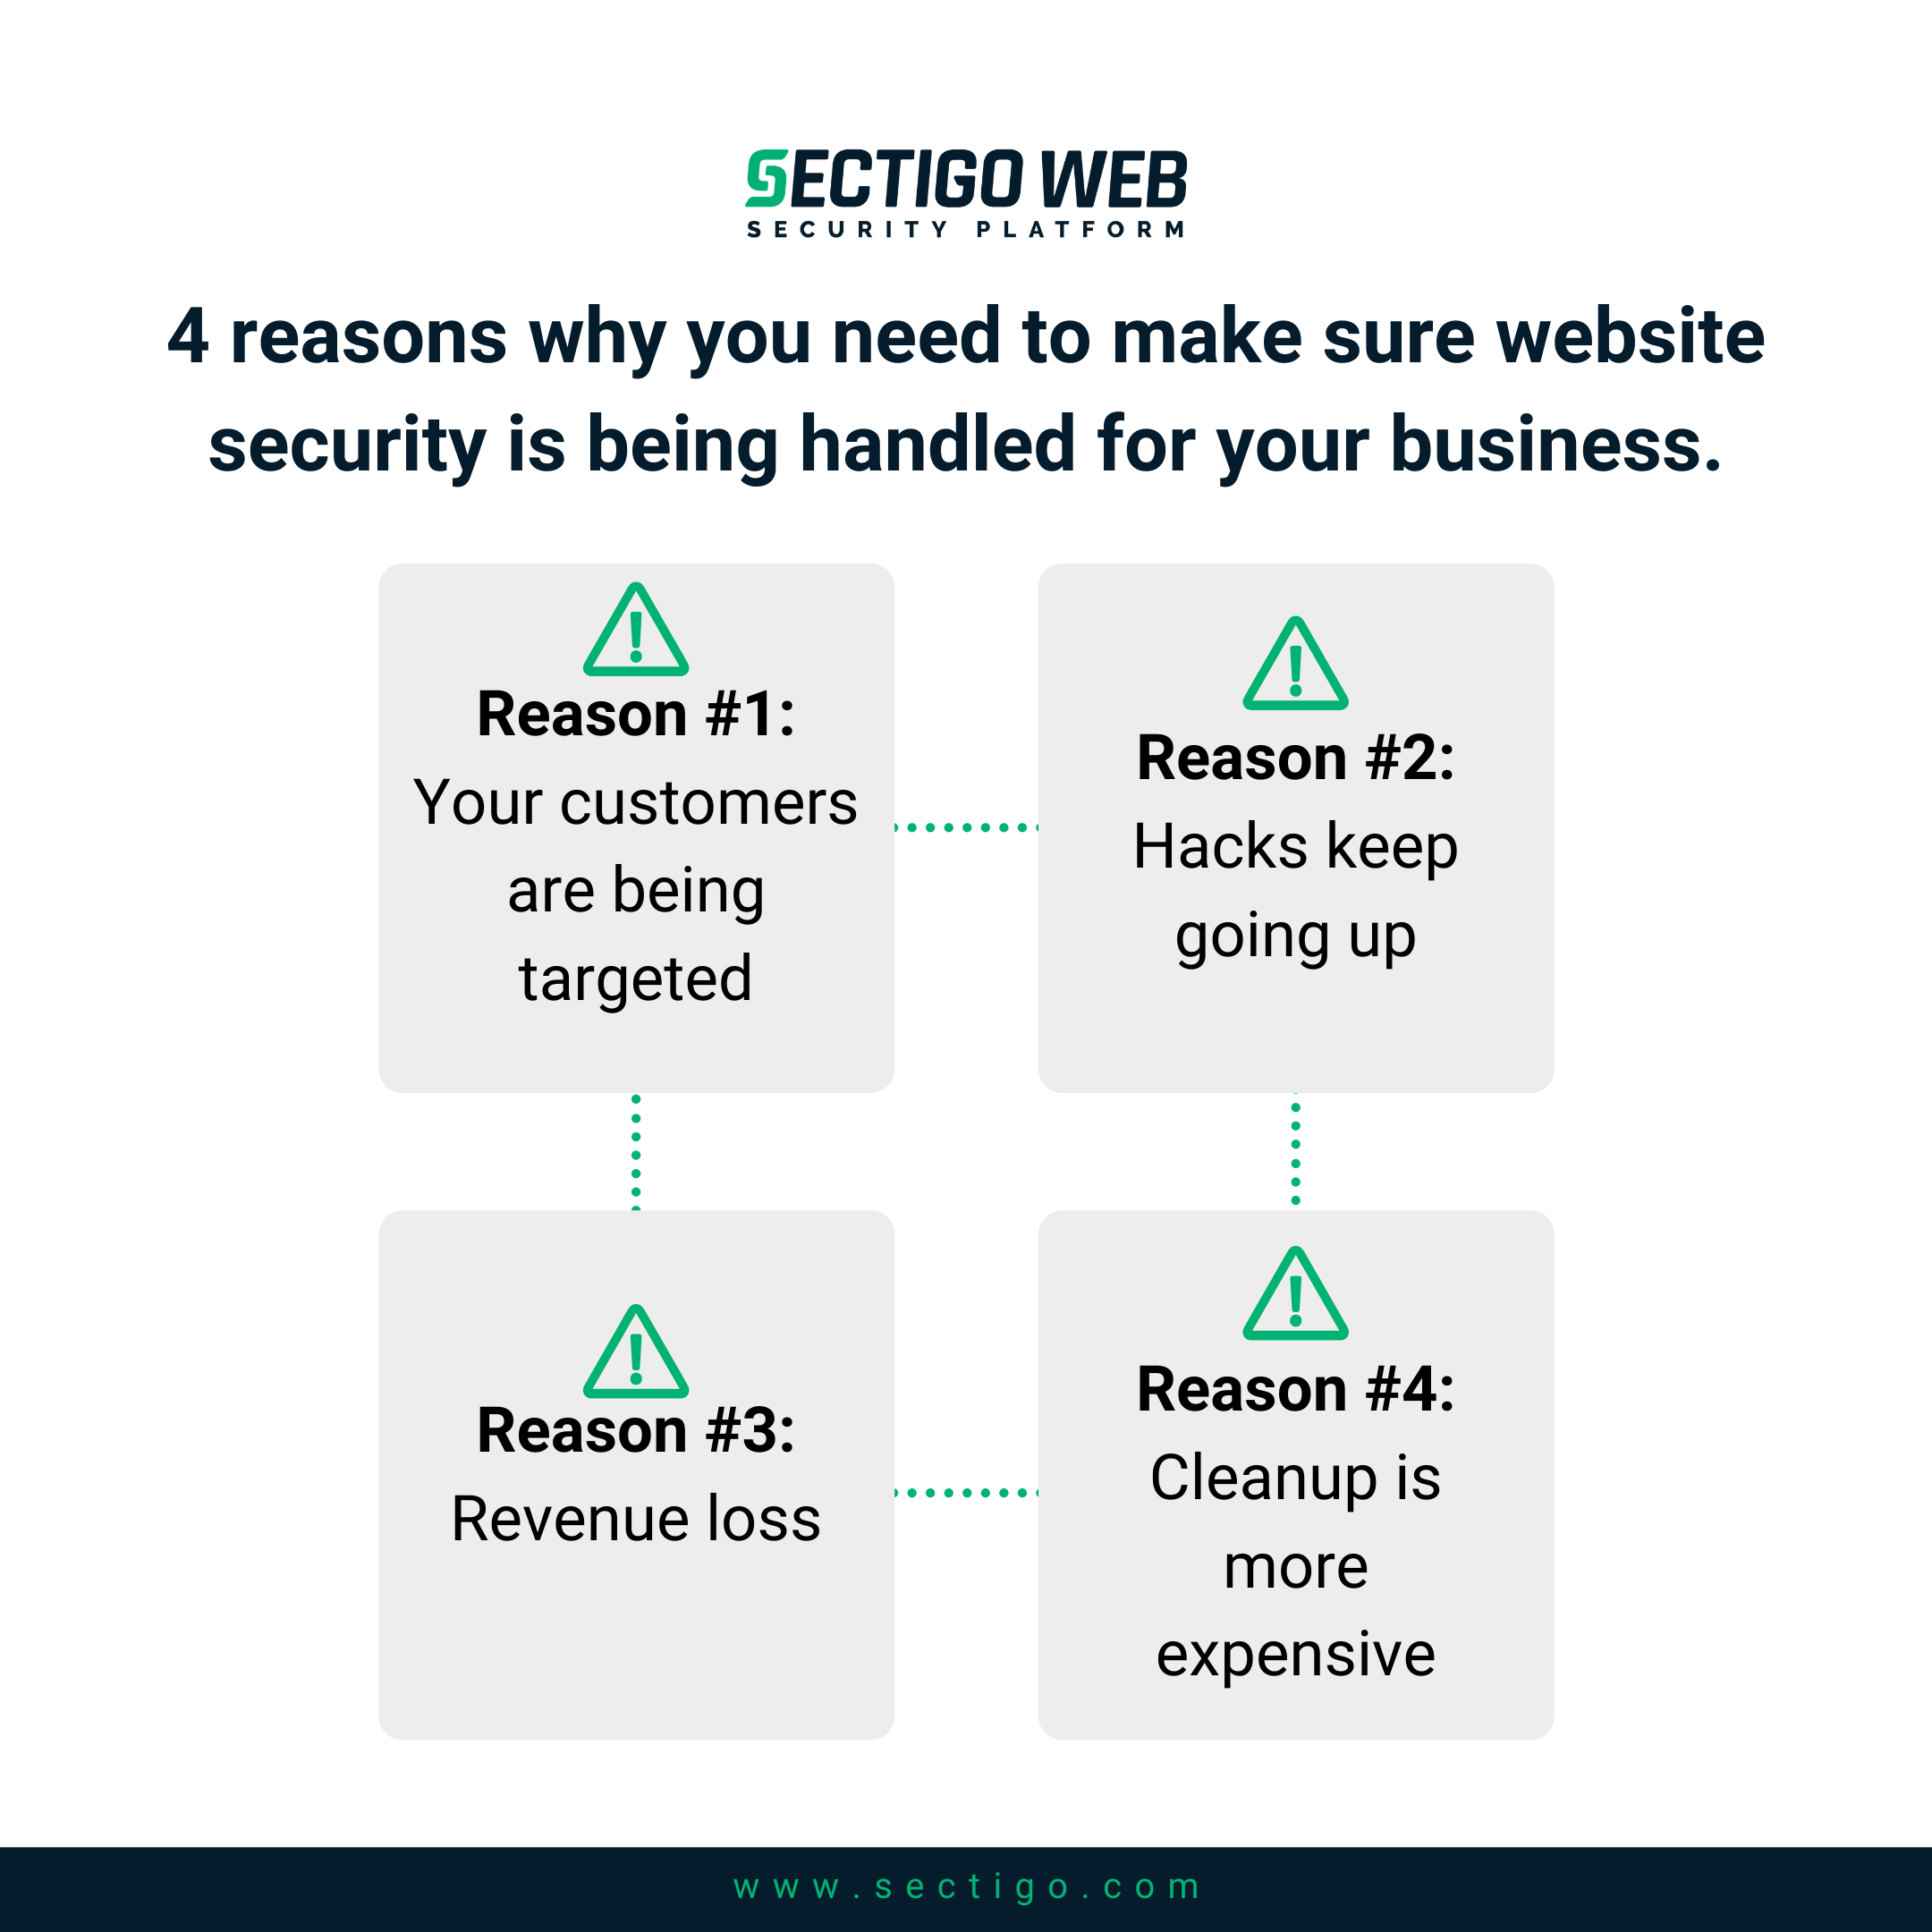 4 reasons why you need to make sure your website security is being handled.